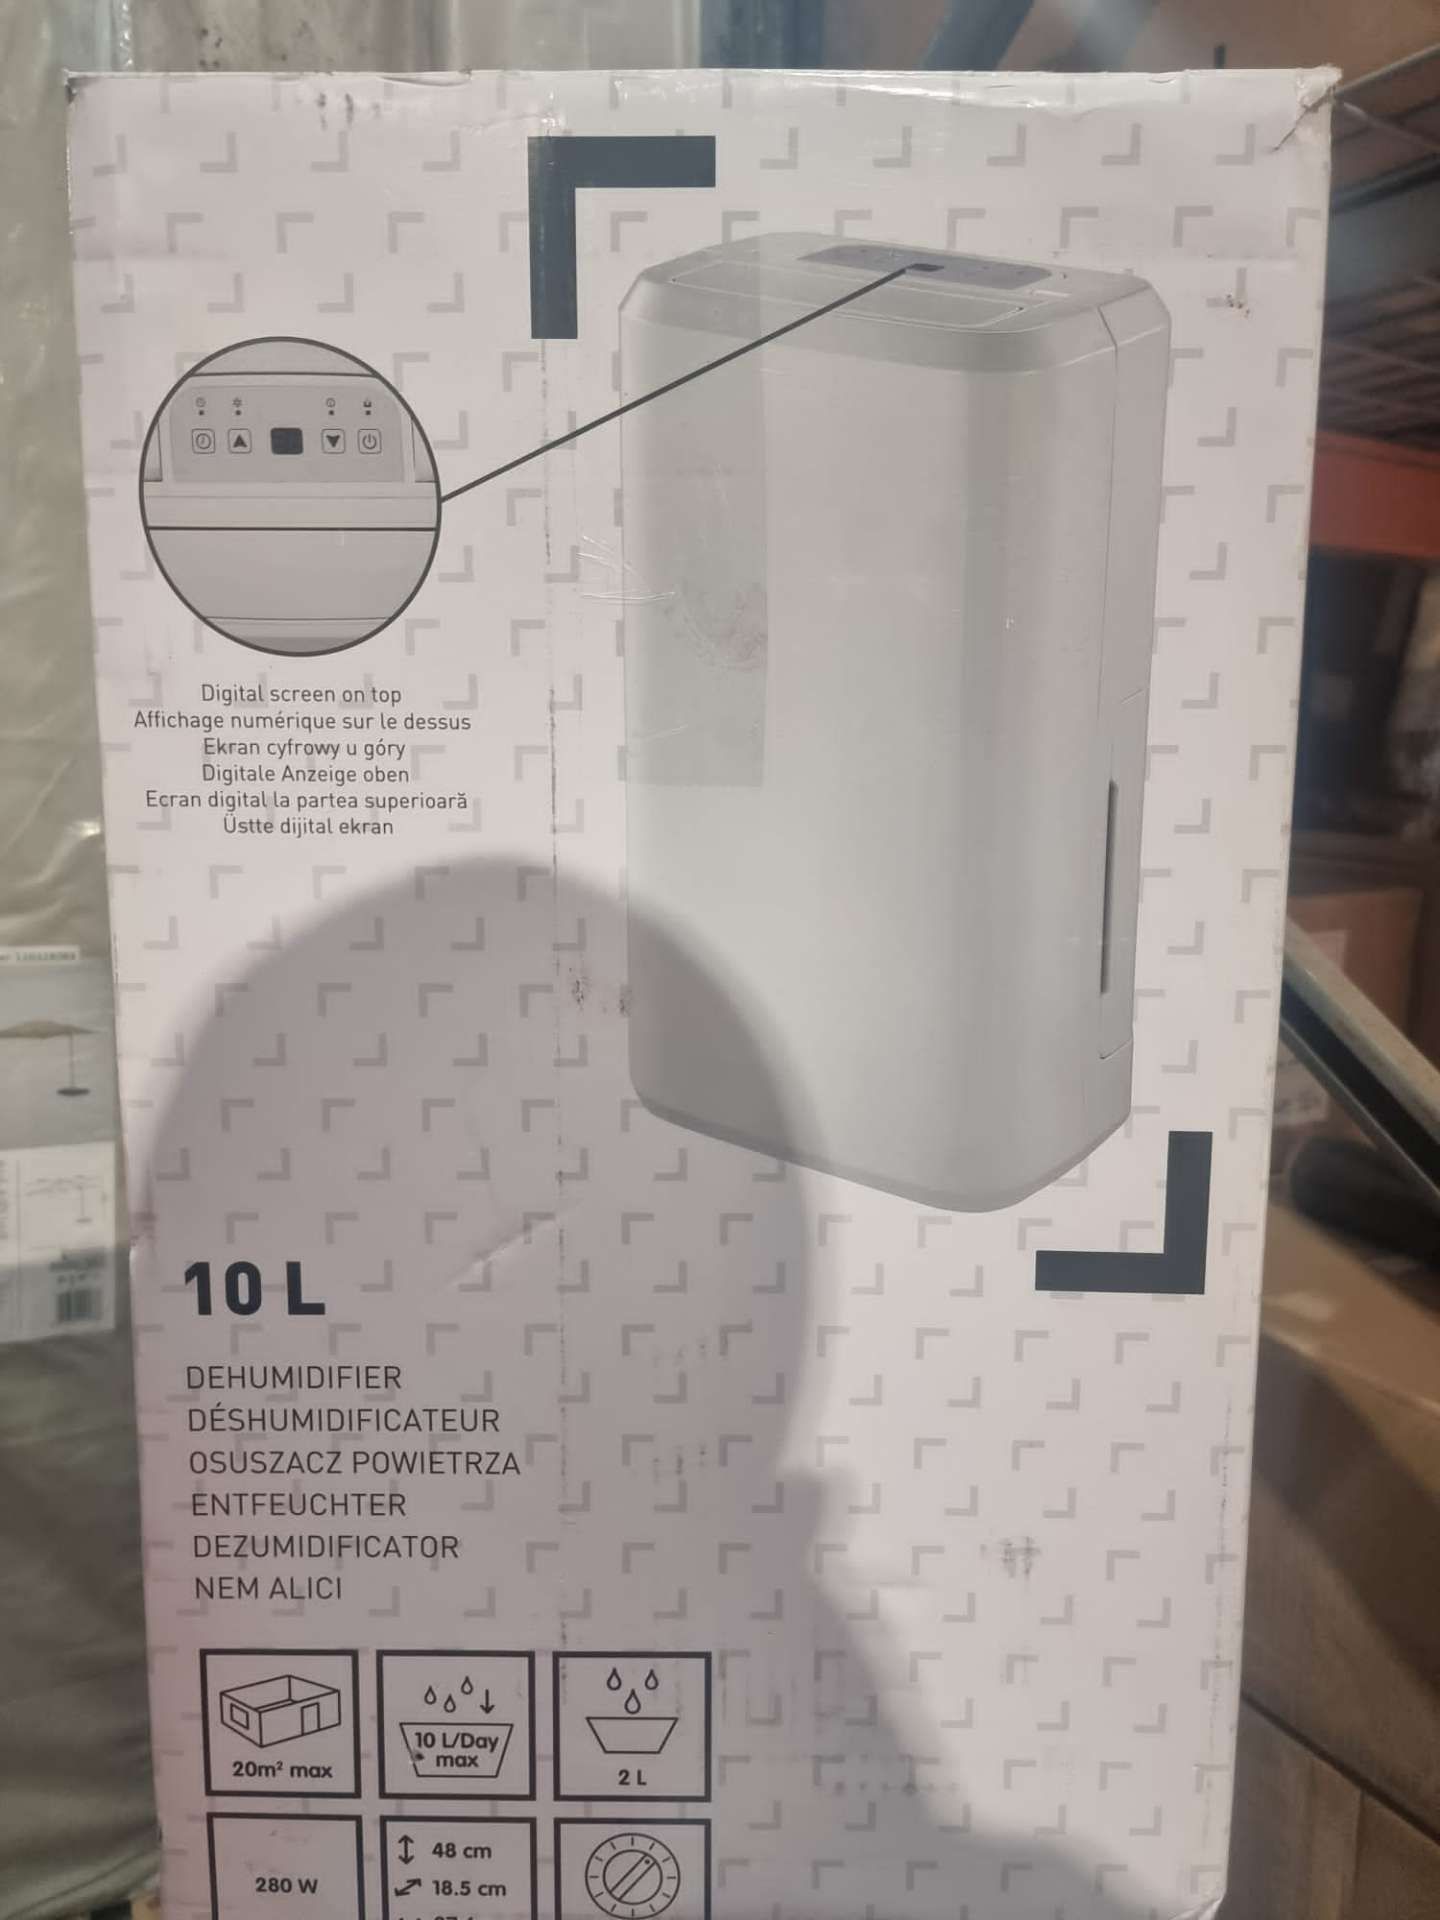 BOXED 10L BLYSS DEHUMIDIFIER RRP £135 R10-7 - Image 2 of 2